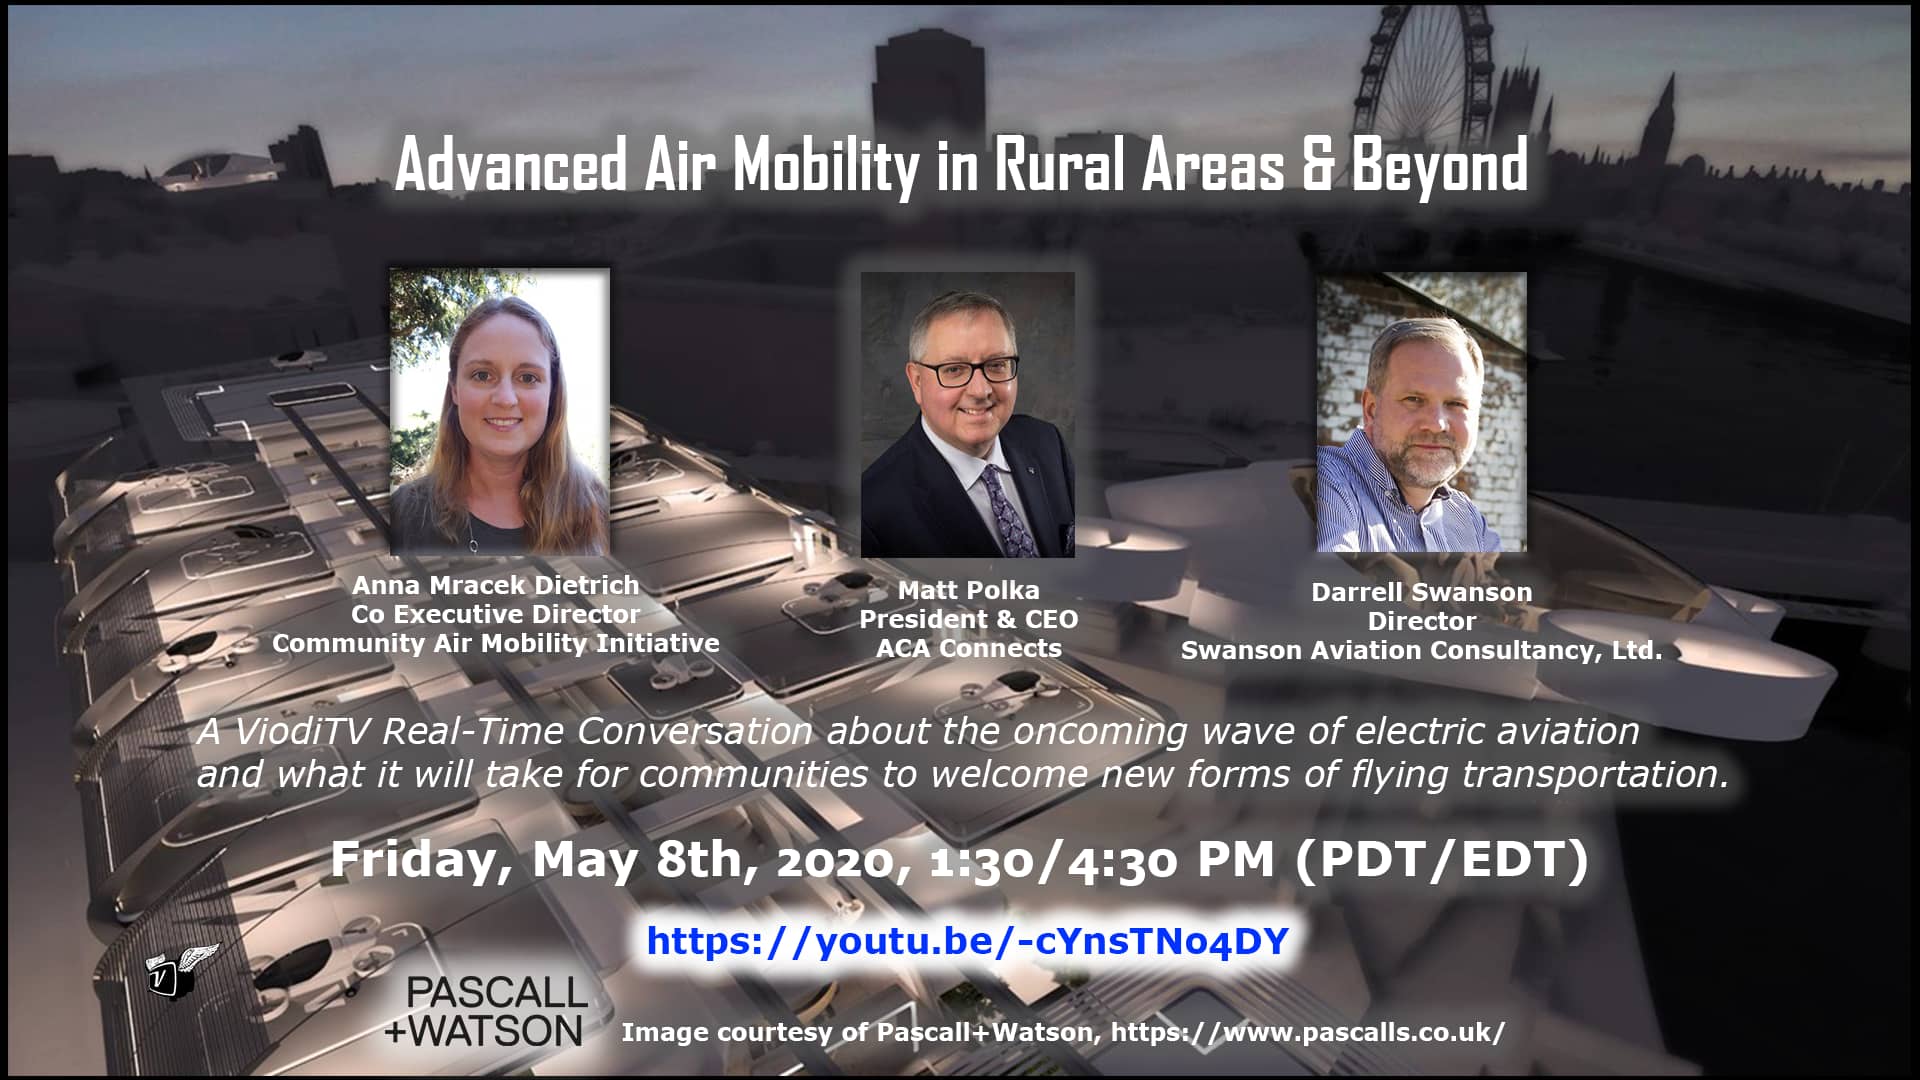 Advanced Air Mobility in Rural Areas & Beyond – A ViodiTV Real-Time Conversation